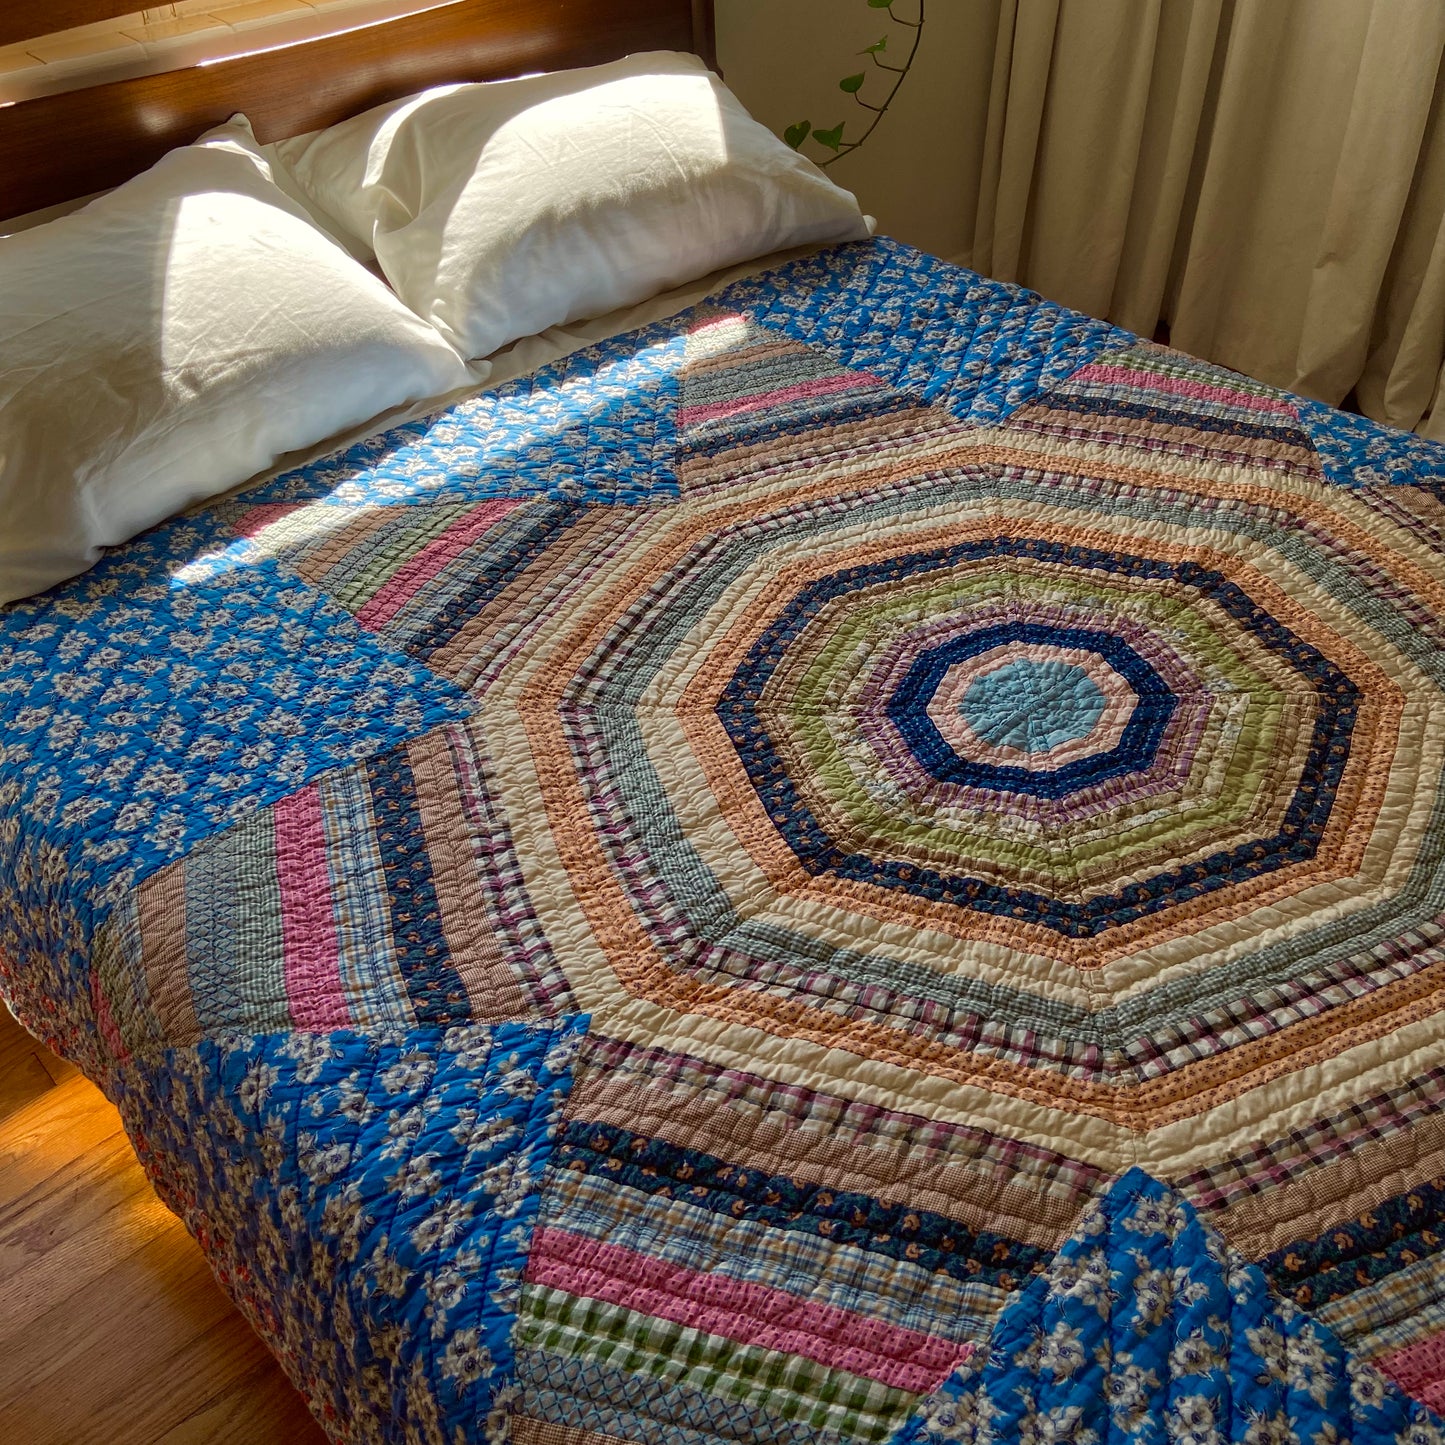 ‘40s Lone Star Quilt